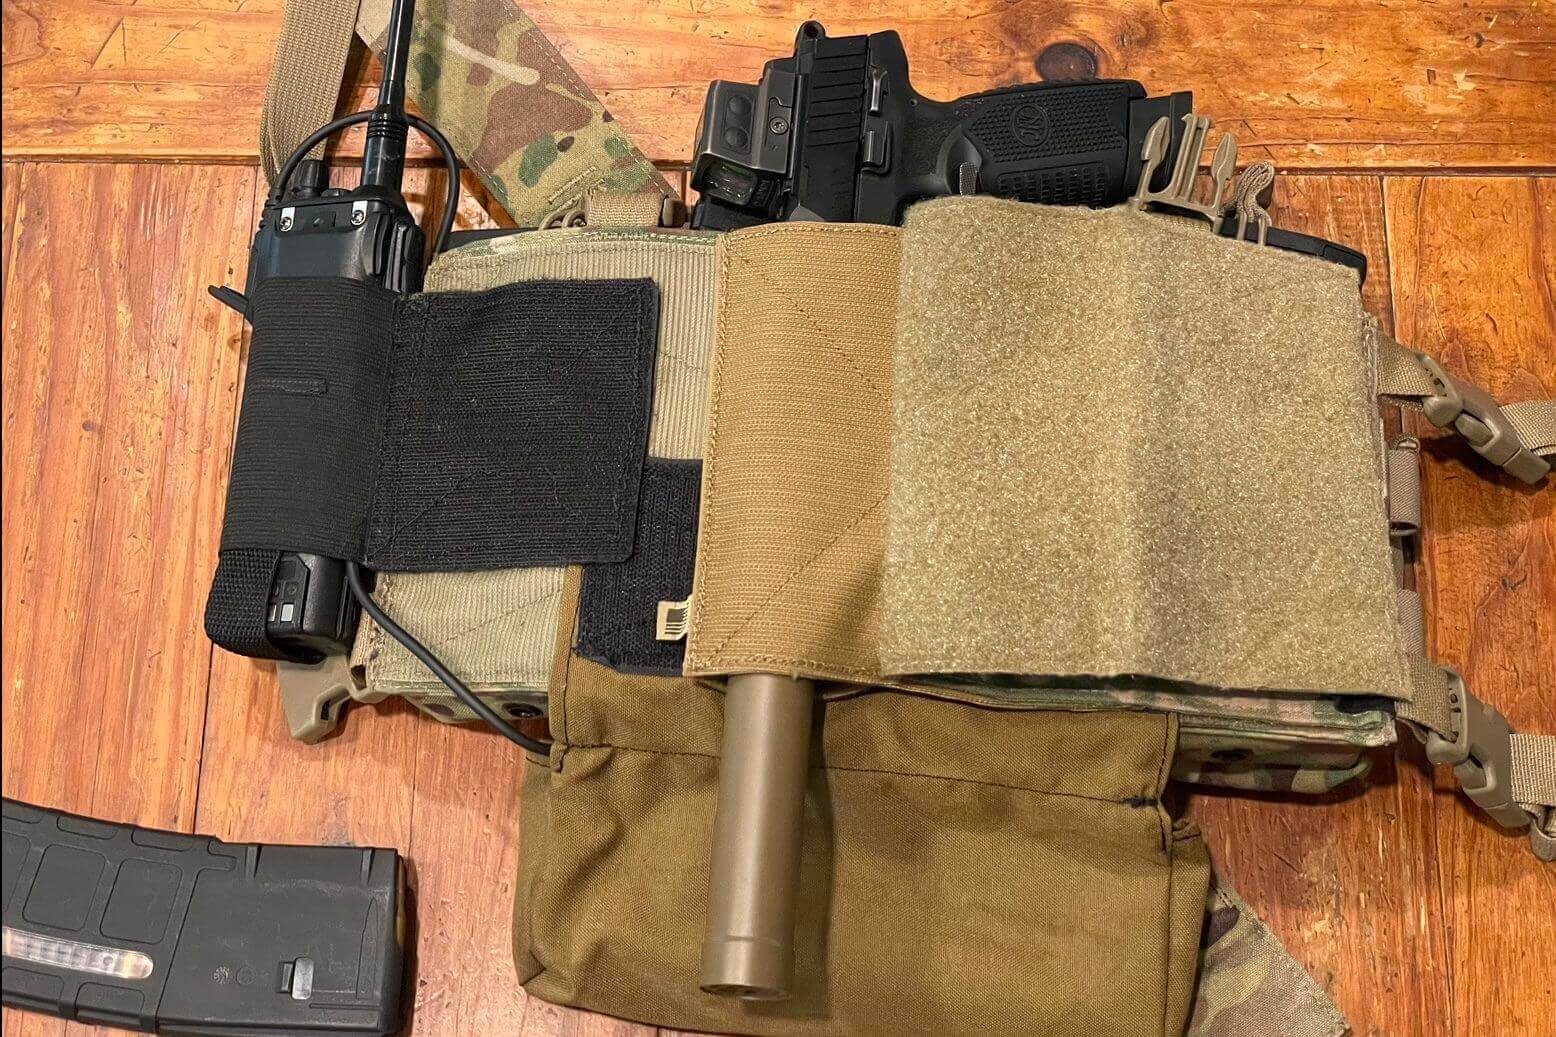 Velcro back cover for the D3CR™-H chest rig allowing for mounting a variety of extra pouches, danglers, and a pistol wedge